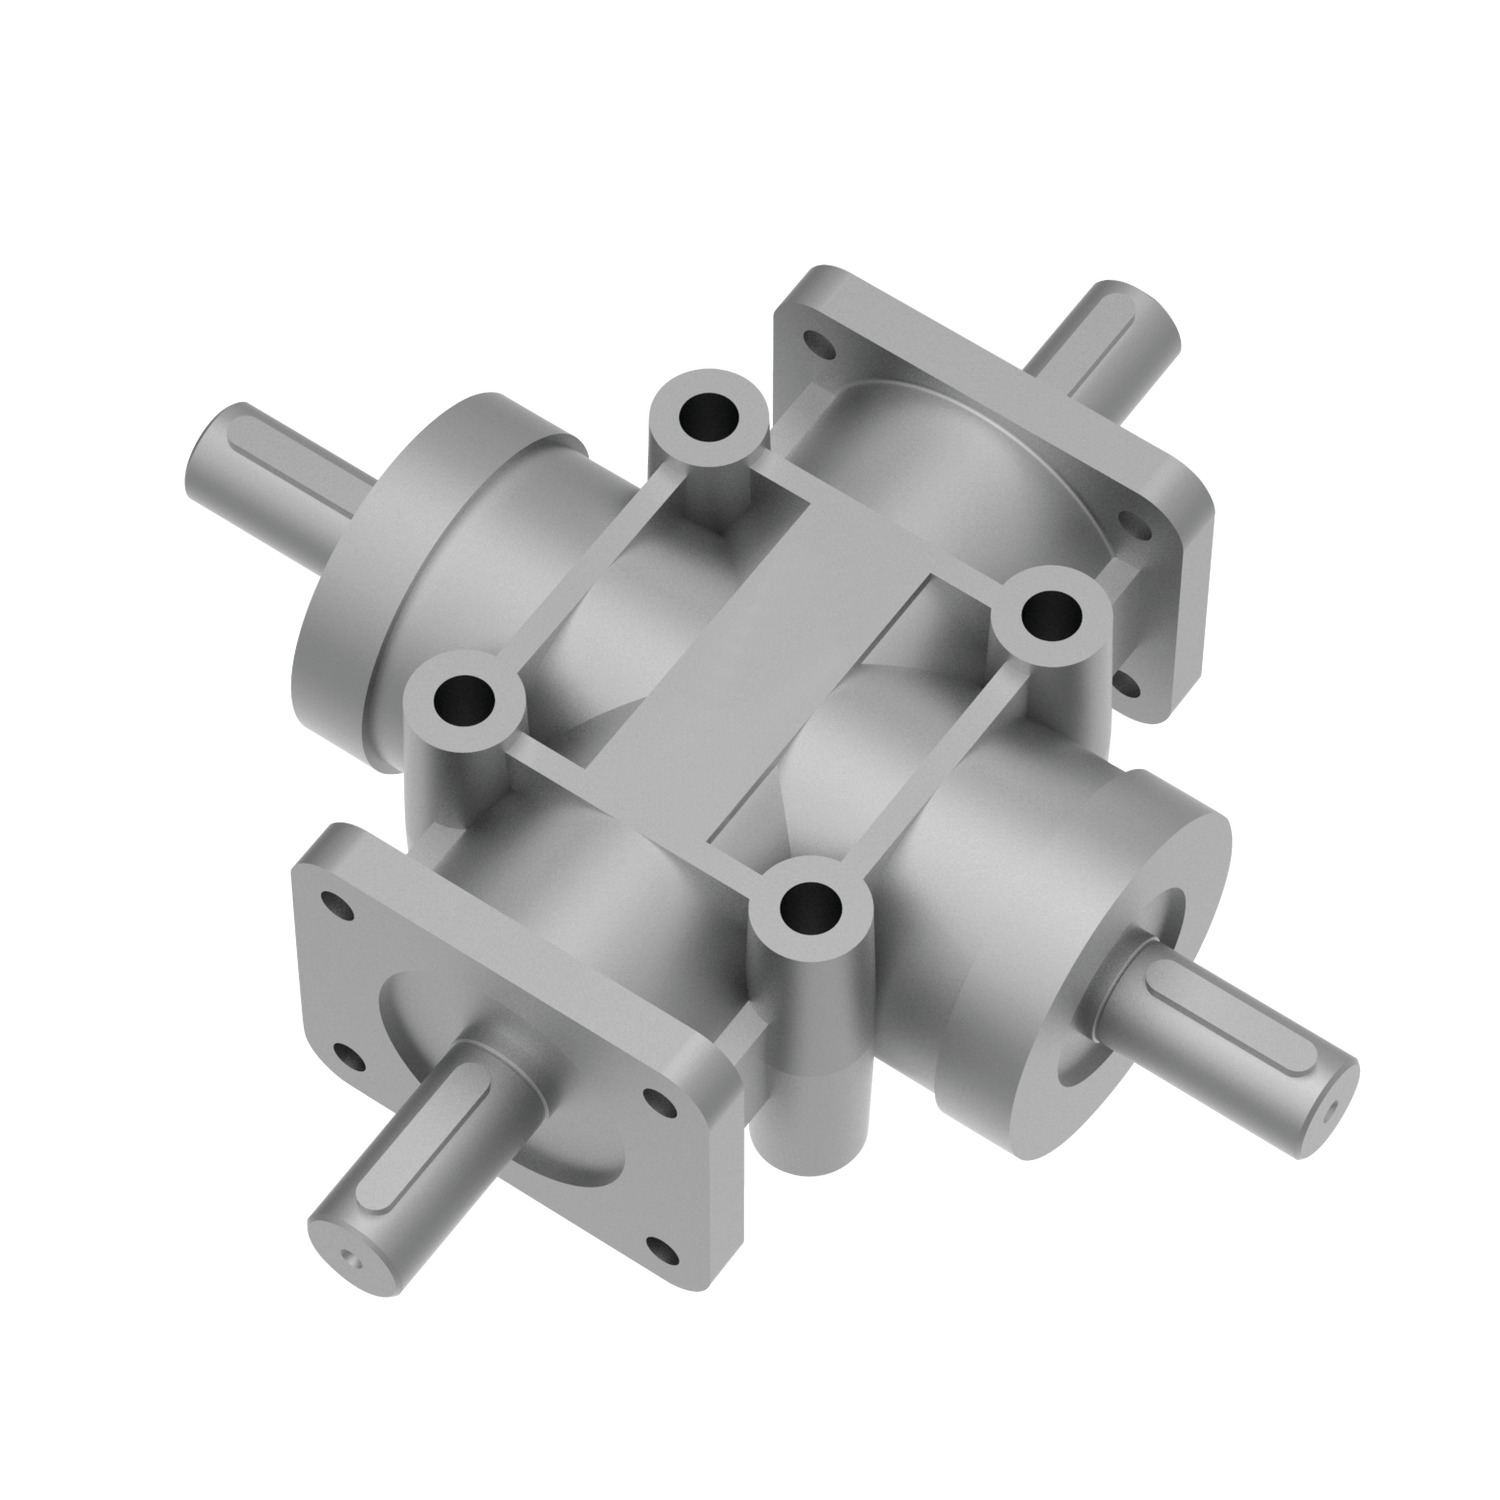 R2345 Right Angle Drives - 4 Shafts